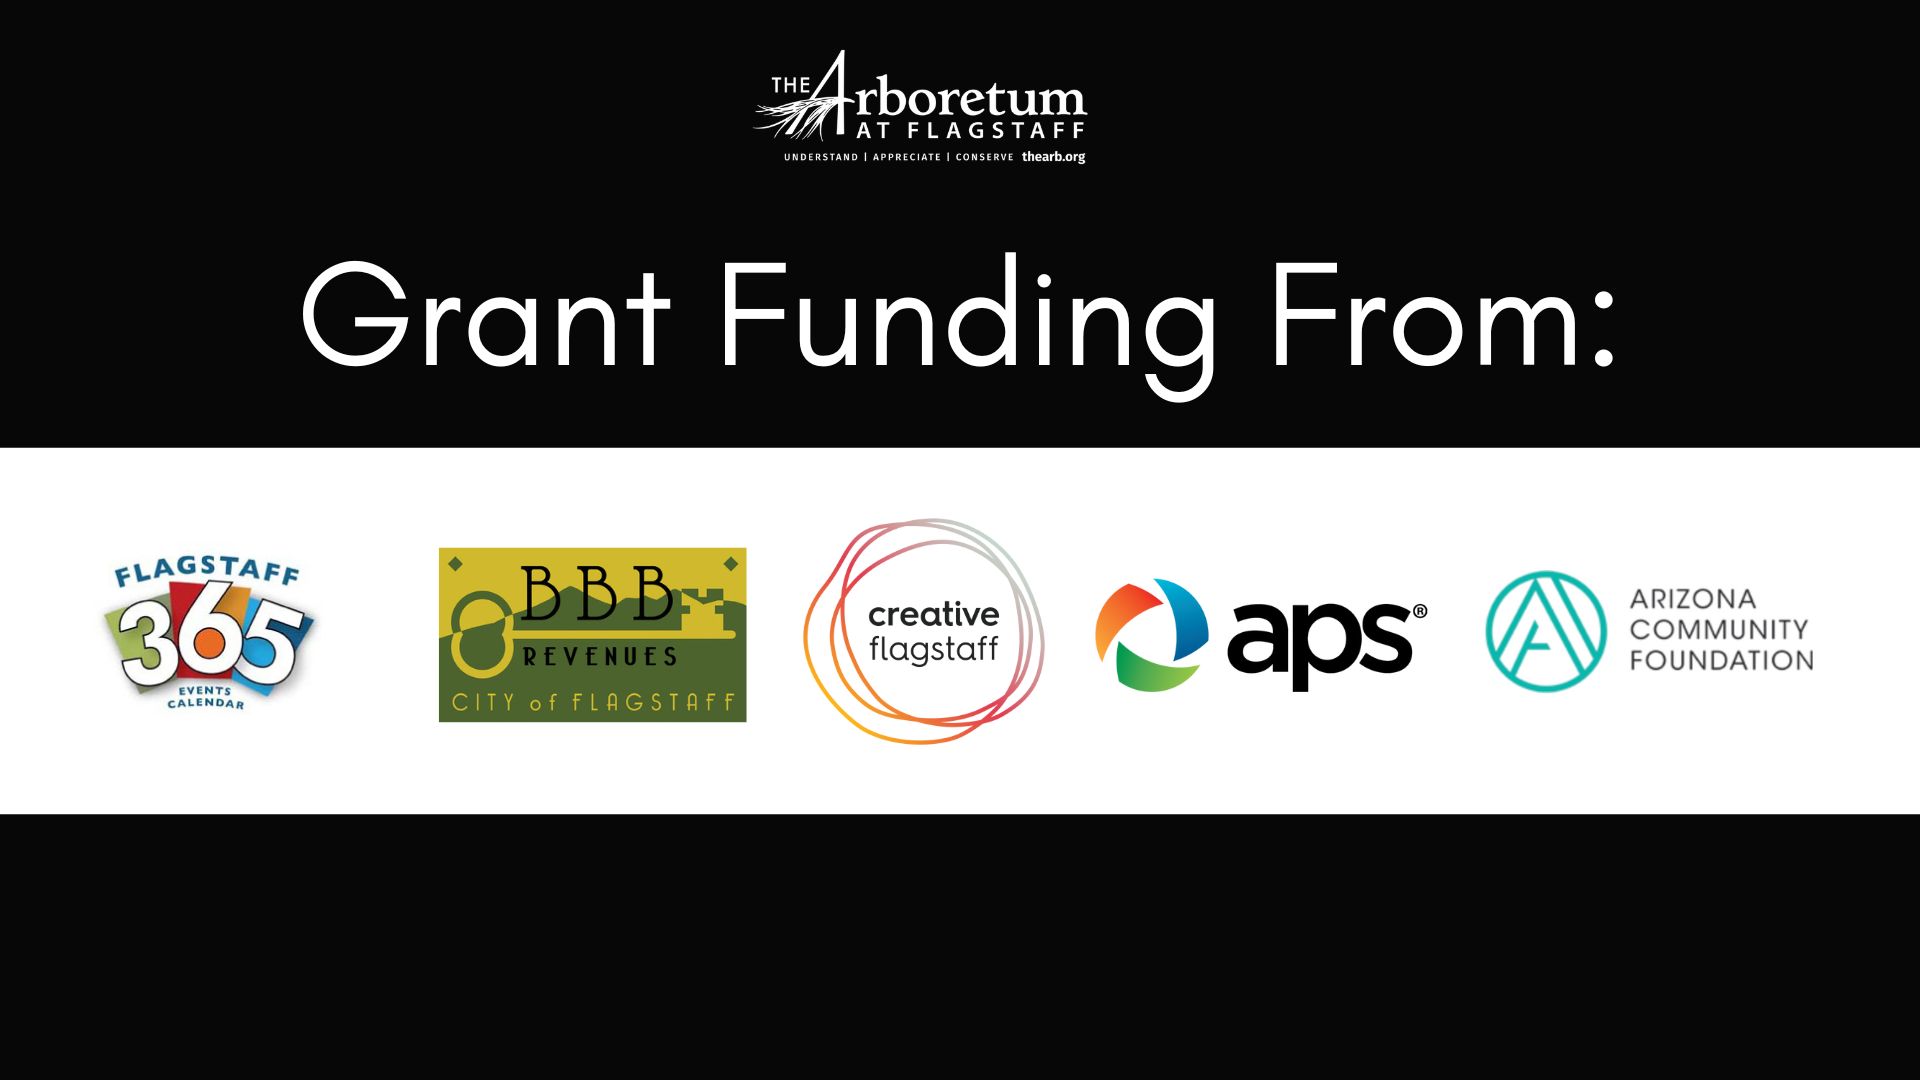 Grant Funding for Arboretum Programs from Flag 365, Creative Flagstaff, Flagstaff BBB revenues, APS, and the Arizona Community Foundation